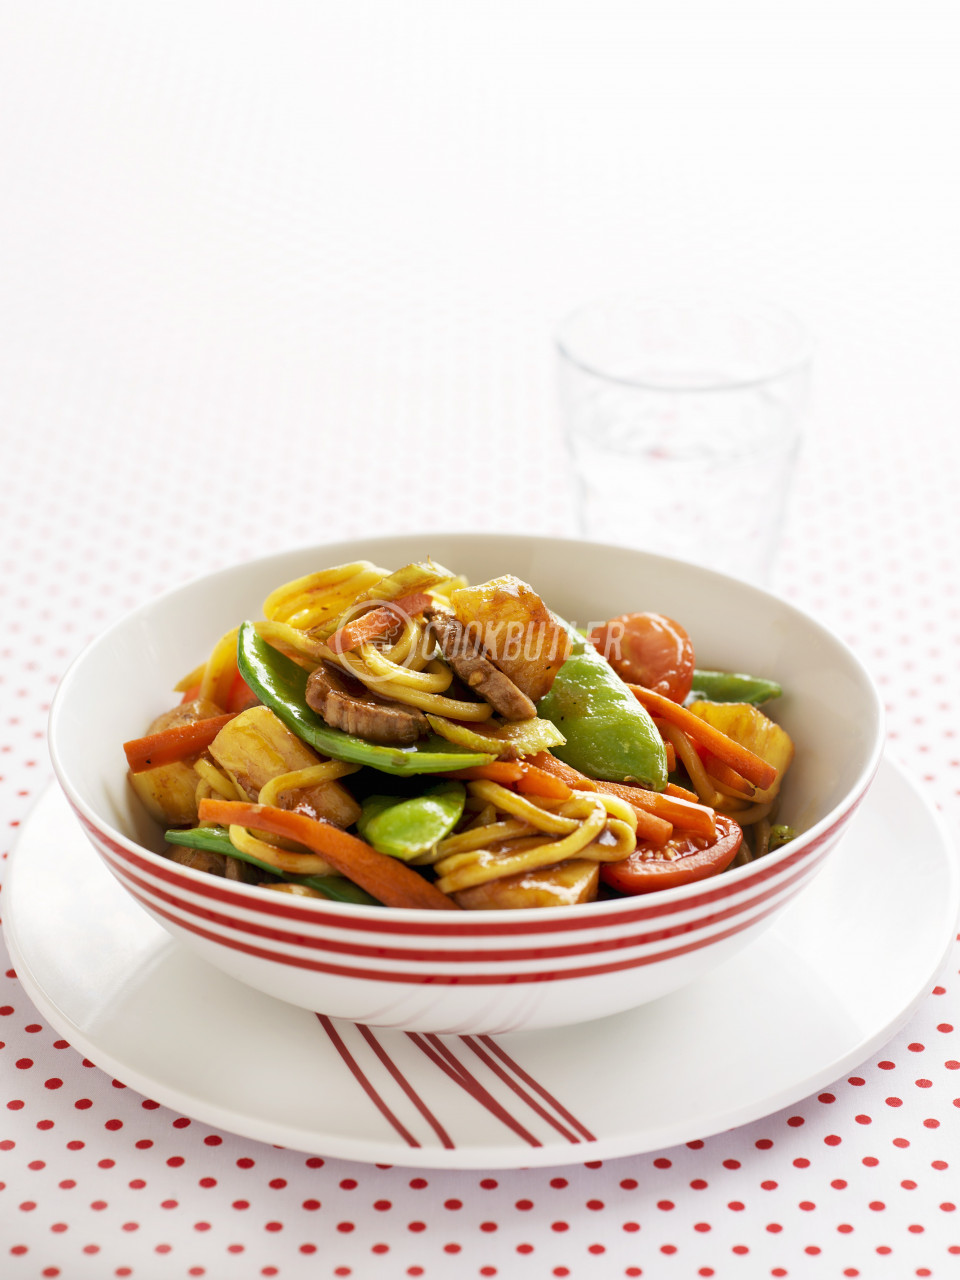 Gluten-free Sweet and sour pork with vegetables and noodles | preview